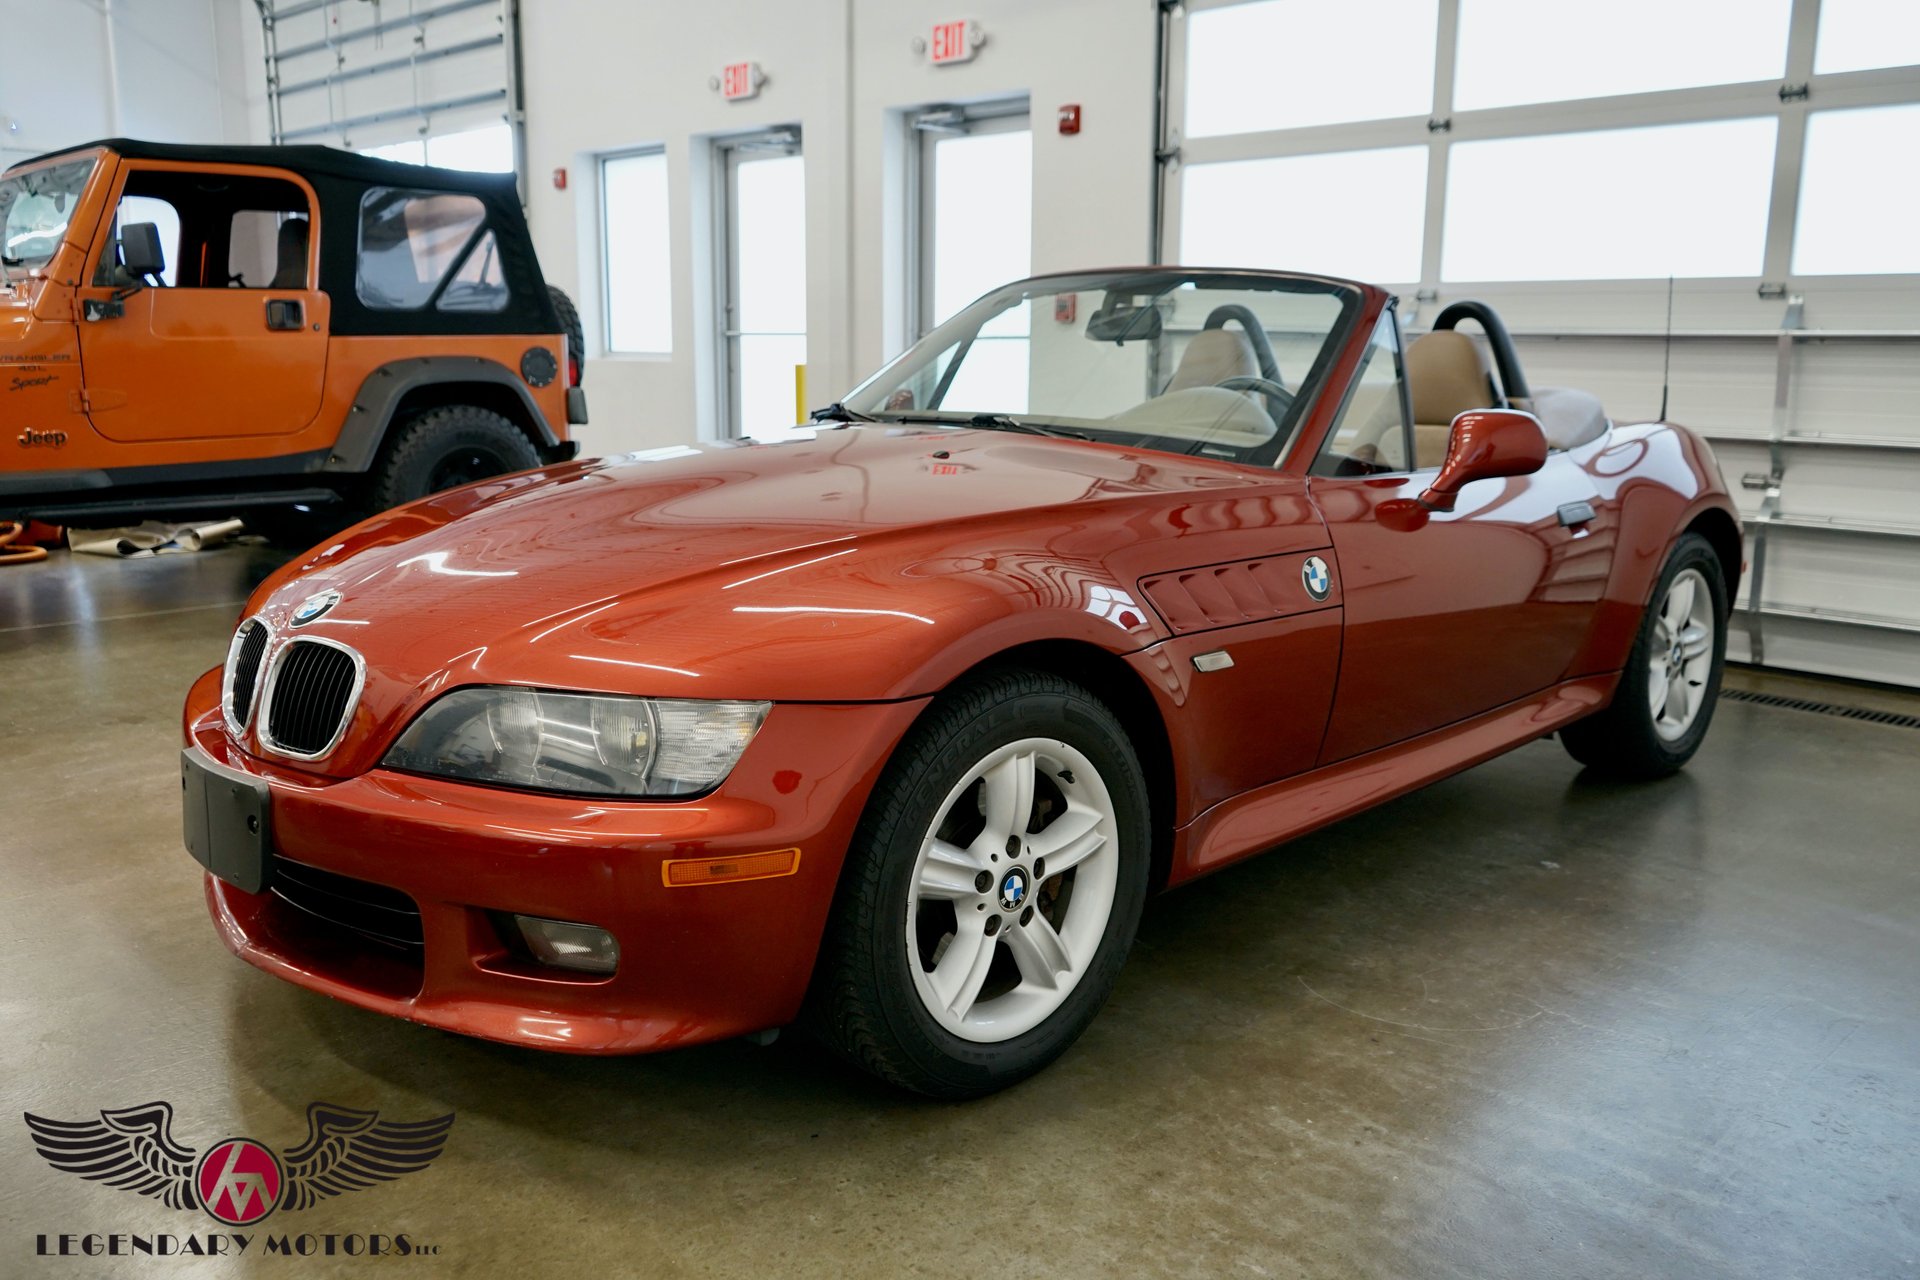 2001 BMW Z3  Legendary Motors - Classic Cars, Muscle Cars, Hot Rods &  Antique Cars - Rowley, MA